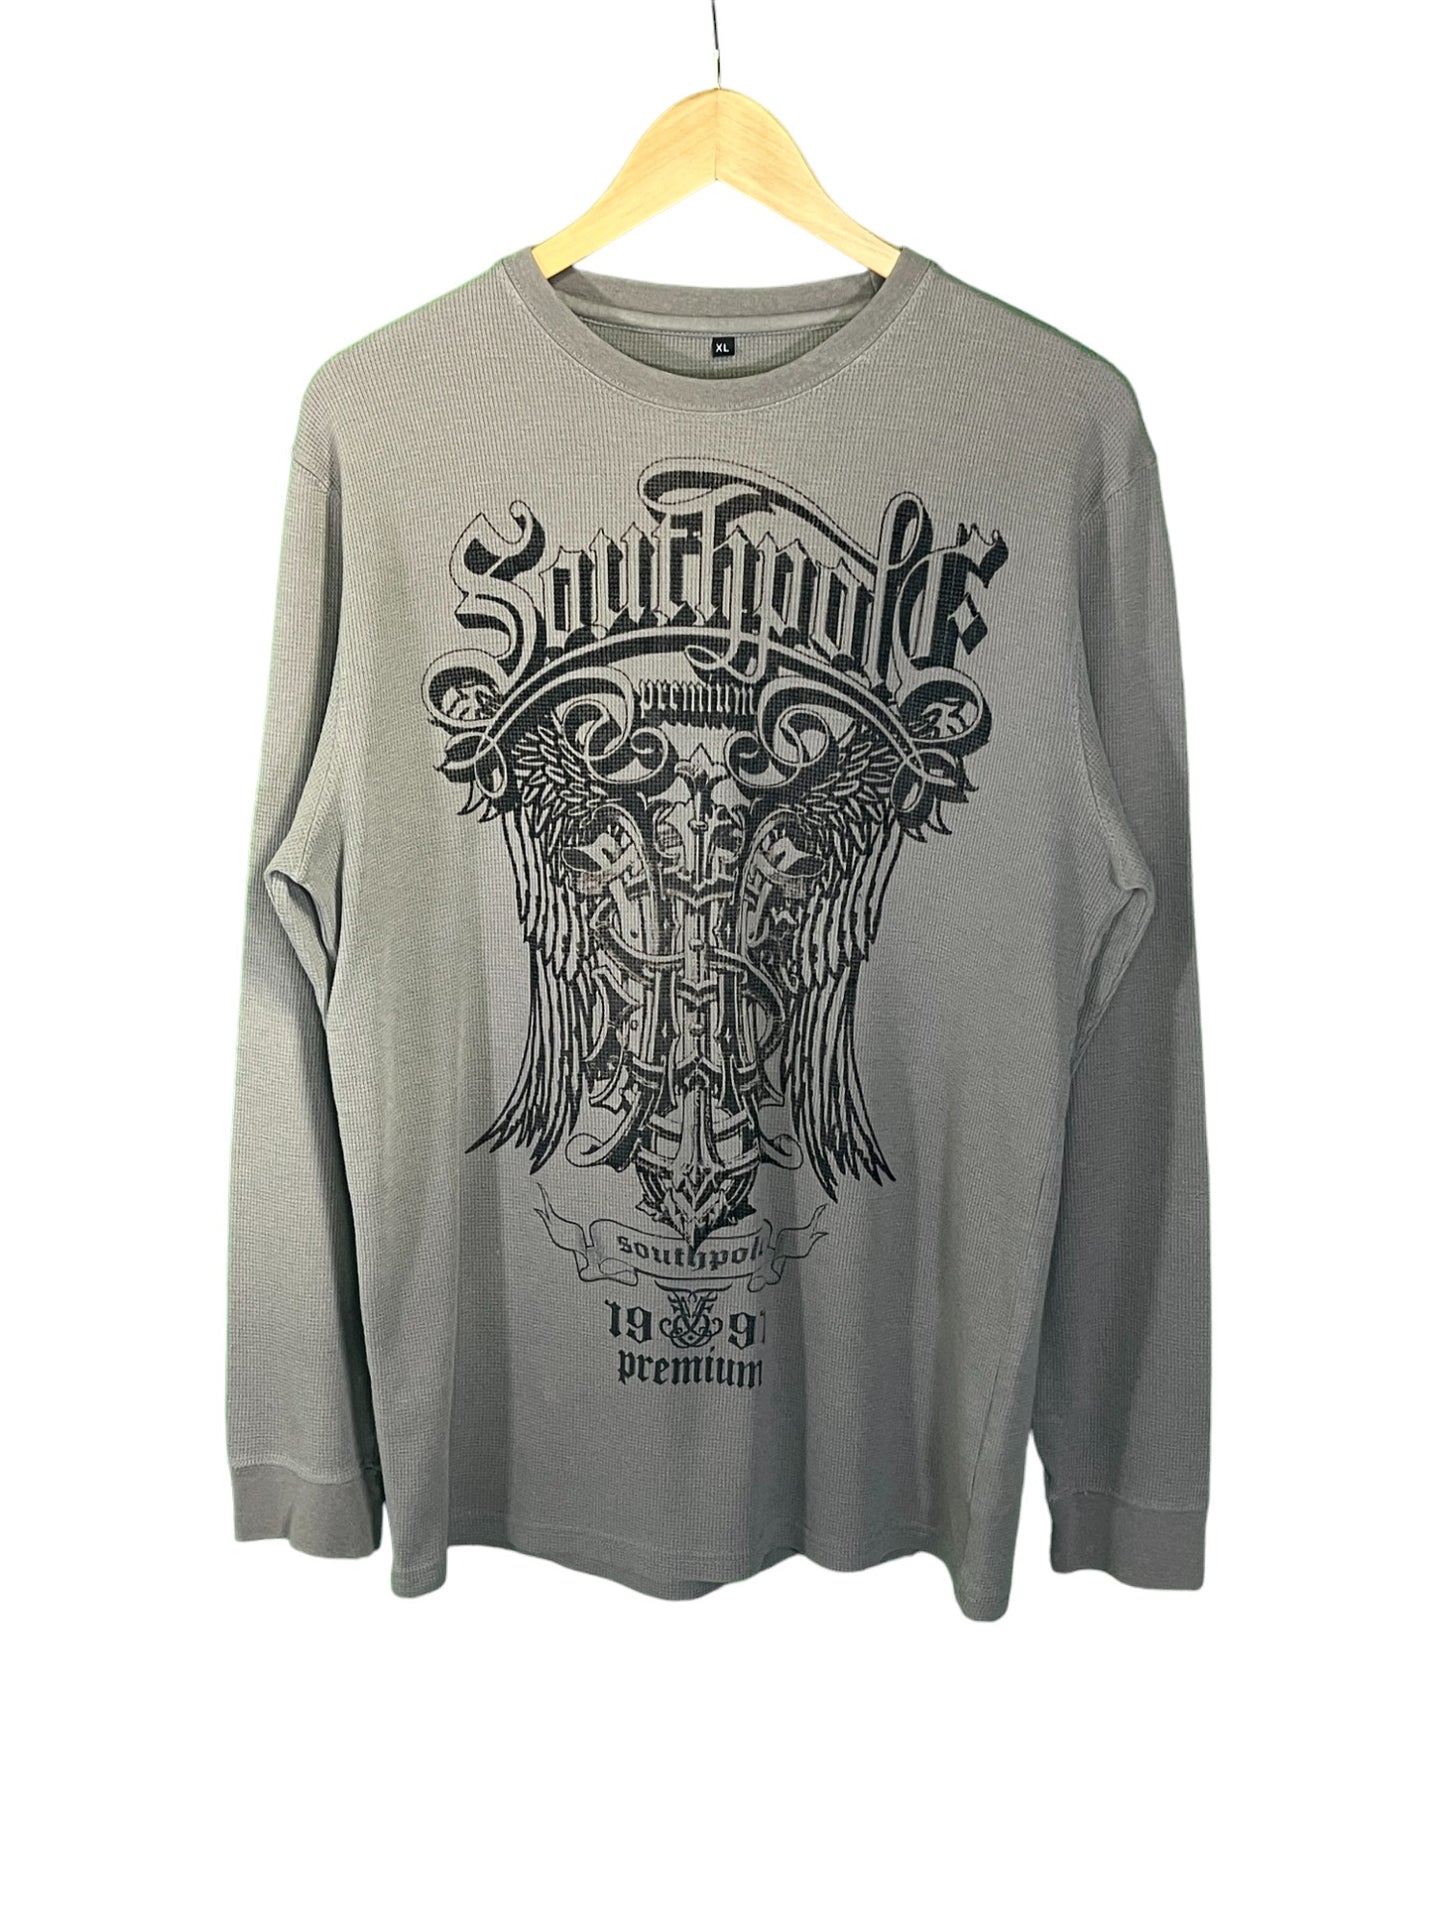 Vintage 00's South Pole Brand Grey Thermal Big Print Graphic Long Sleeve Size XL